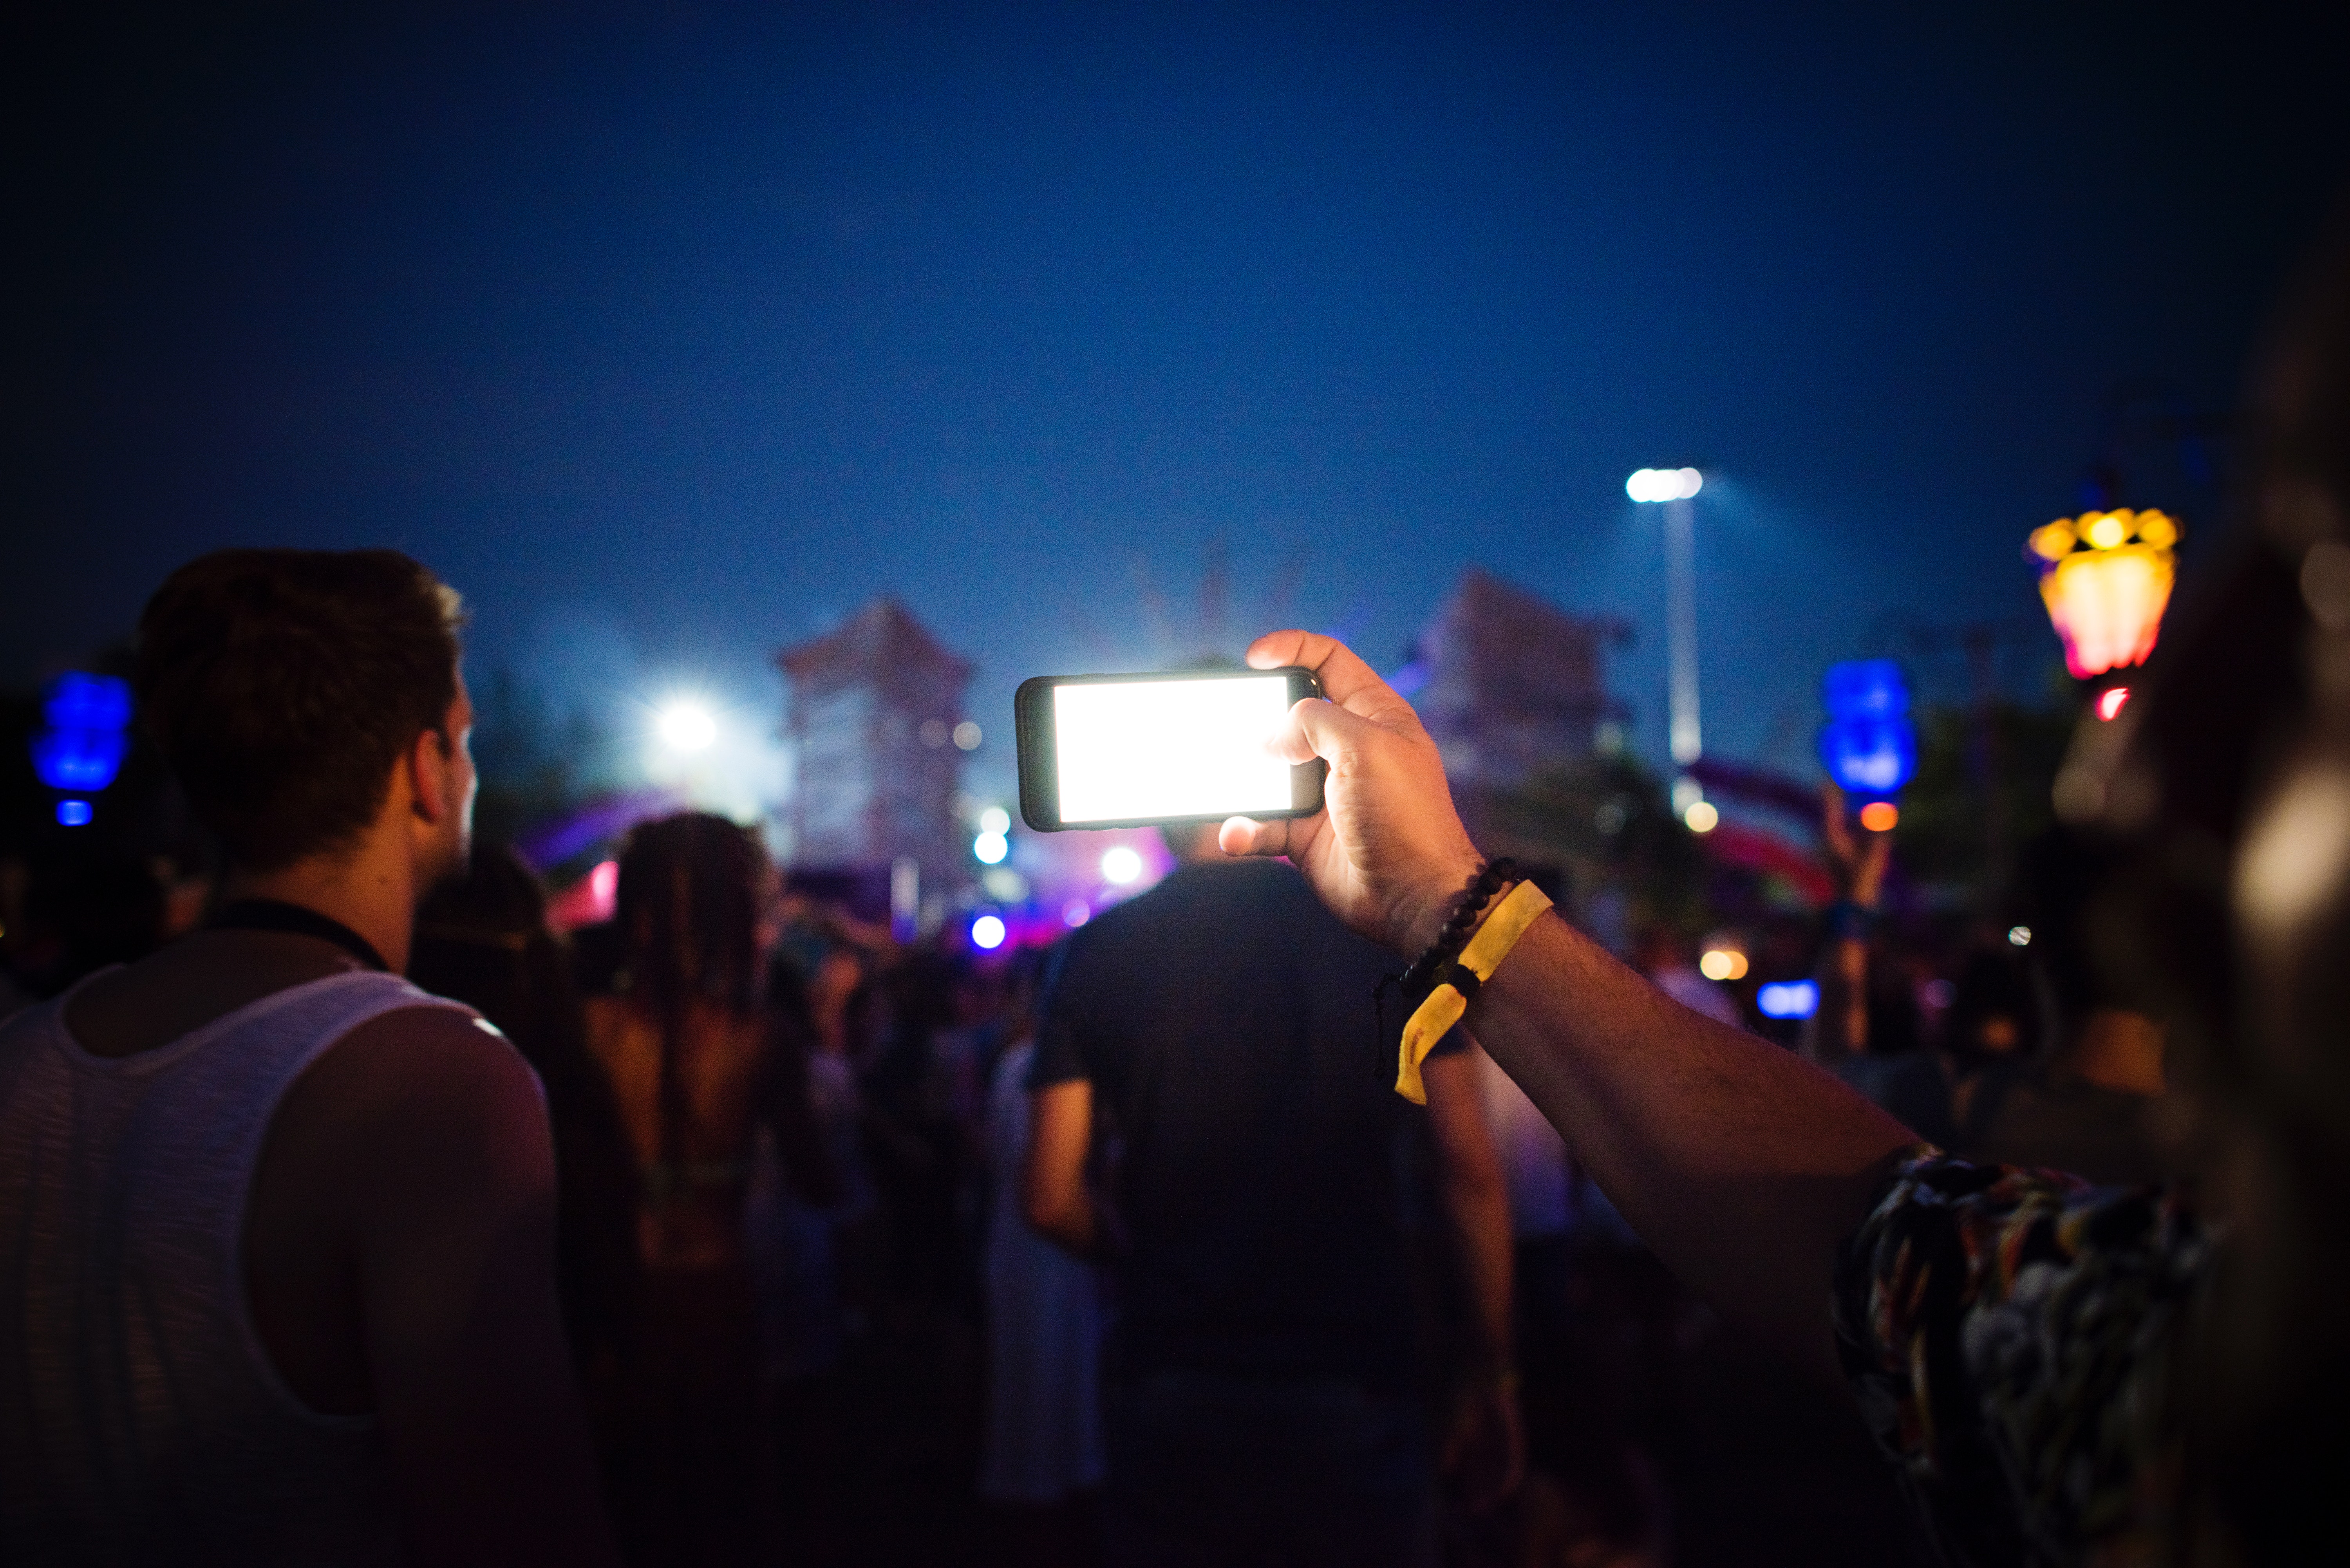 Group of people using smartphones during nighttime photo